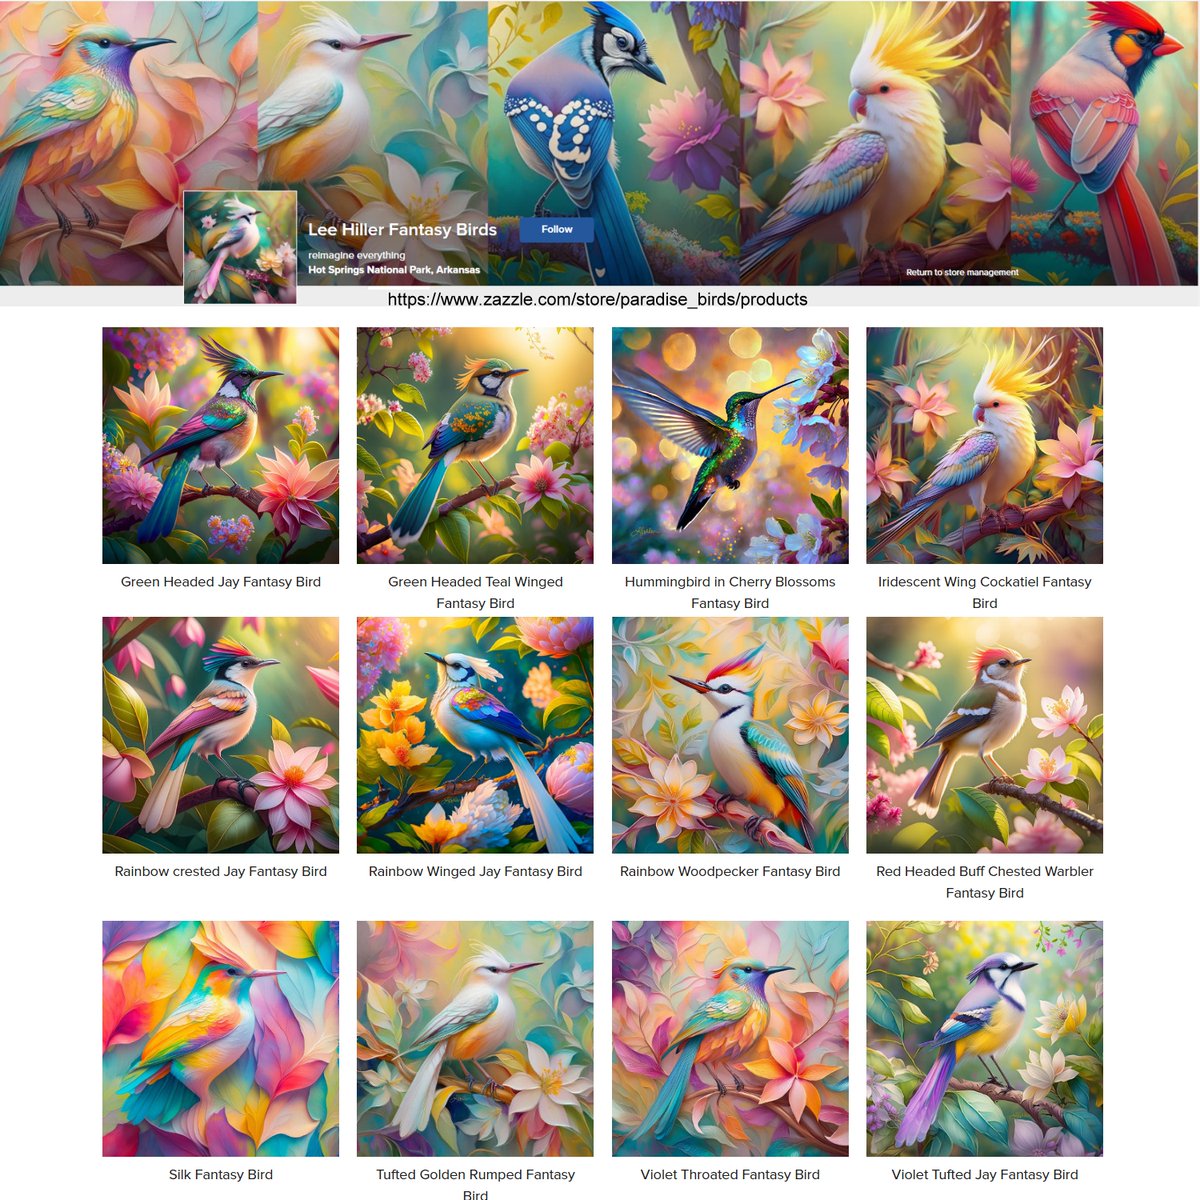 🌺🐦🌱 Unique Fantasy Birds 🌱🐦🌺
zazzle.com/store/paradise…

My Photography and Art combine with AI to create something new

#gifts #giftideas #birds #birdlovers #art #photography